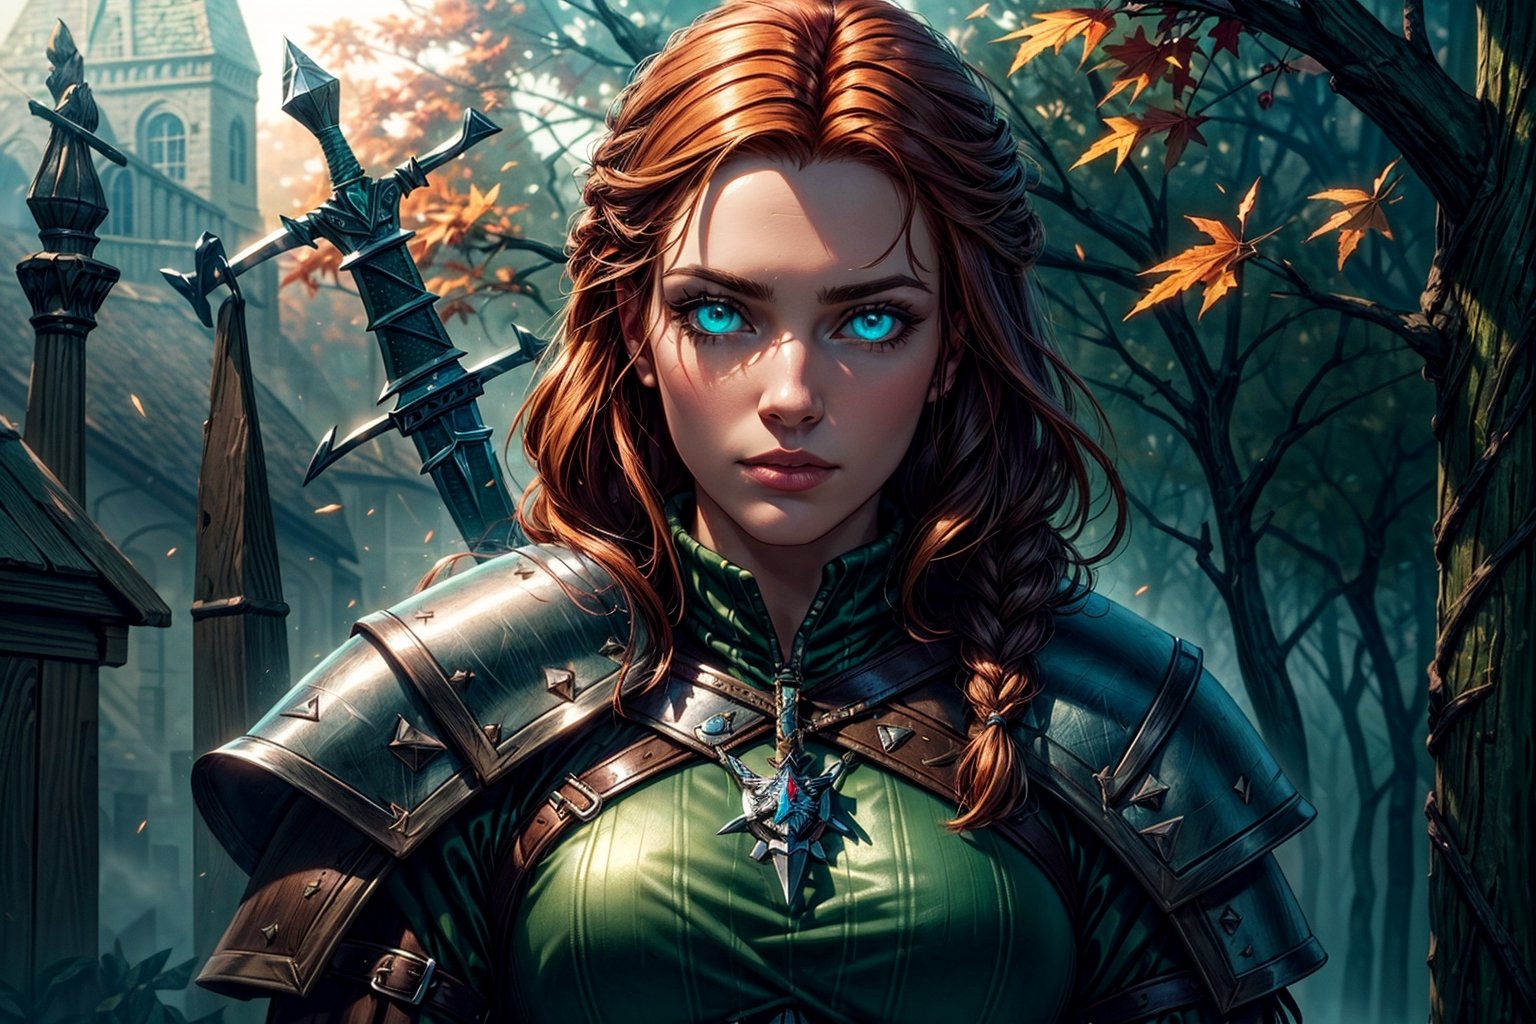 Masterpiece, beautiful details, perfect focus, uniform 8K wallpaper, high resolution, exquisite texture in every detail, Female witcher, ginger hair, braided hair, two swords on back, wolfhead medallion, witcher armor, Dimly lit, Foggy, Octane Render, Fantasy style, Dark souls style, wood, autumn, ((green eyes, glowing eyes)), Masterpiece, 